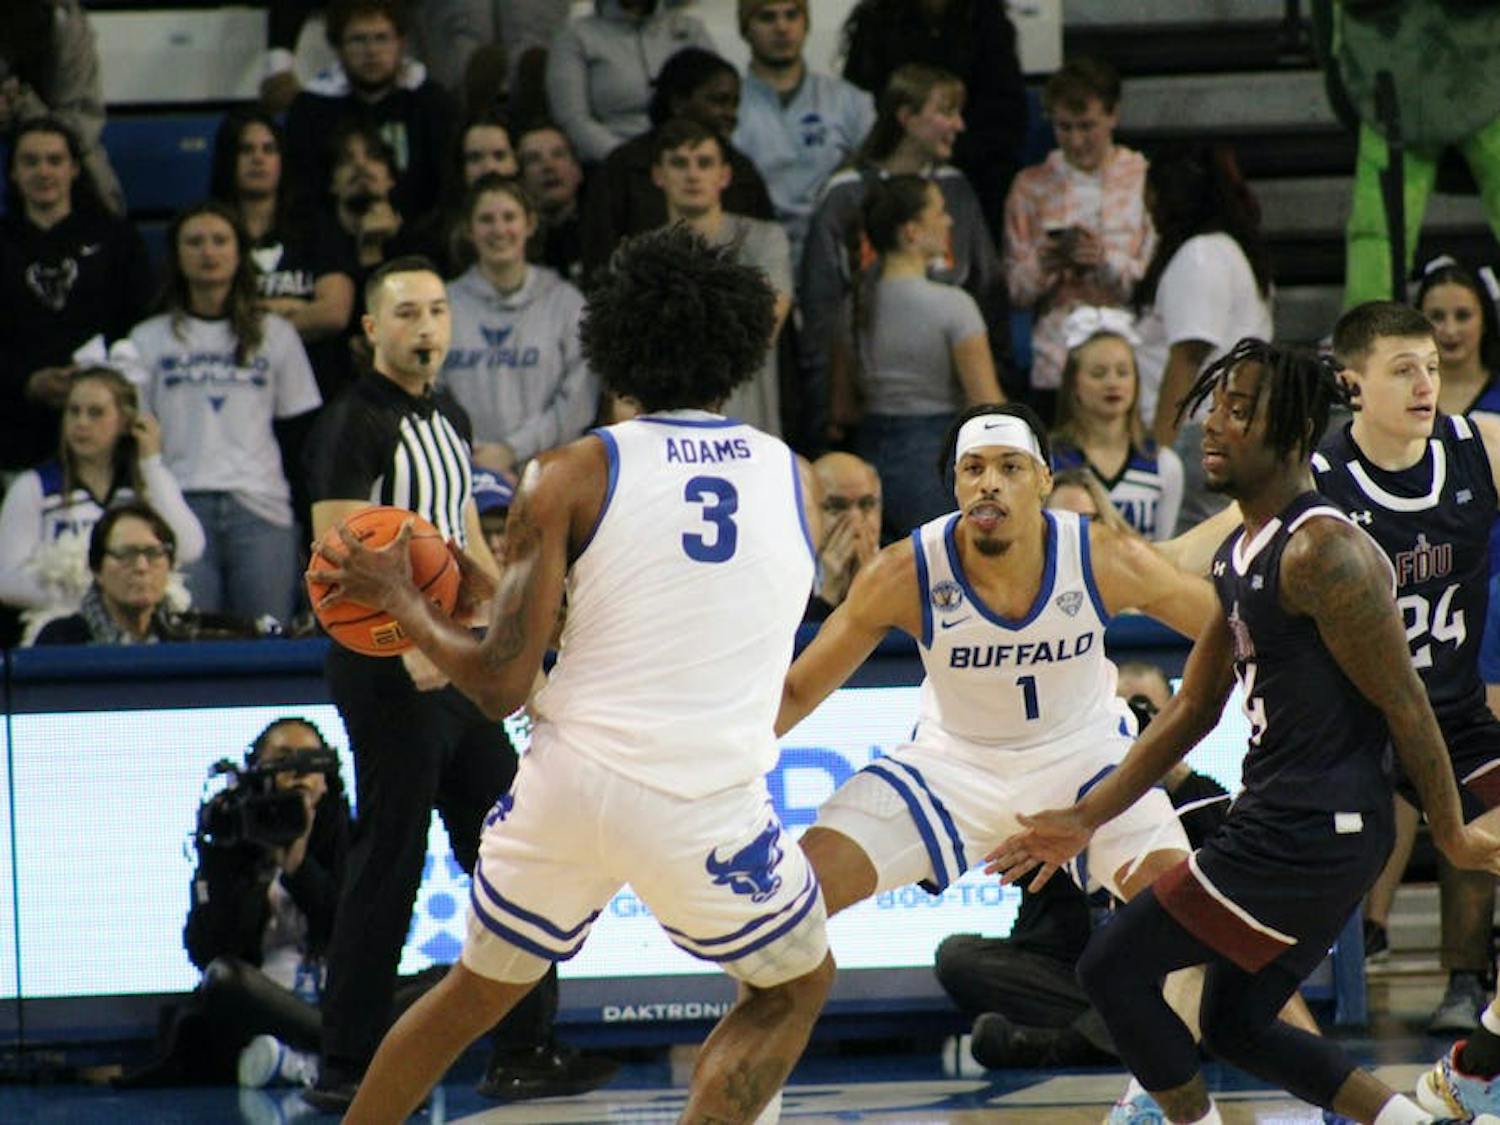 UB's Isaiah Adams handles the ball in the team's home opener.